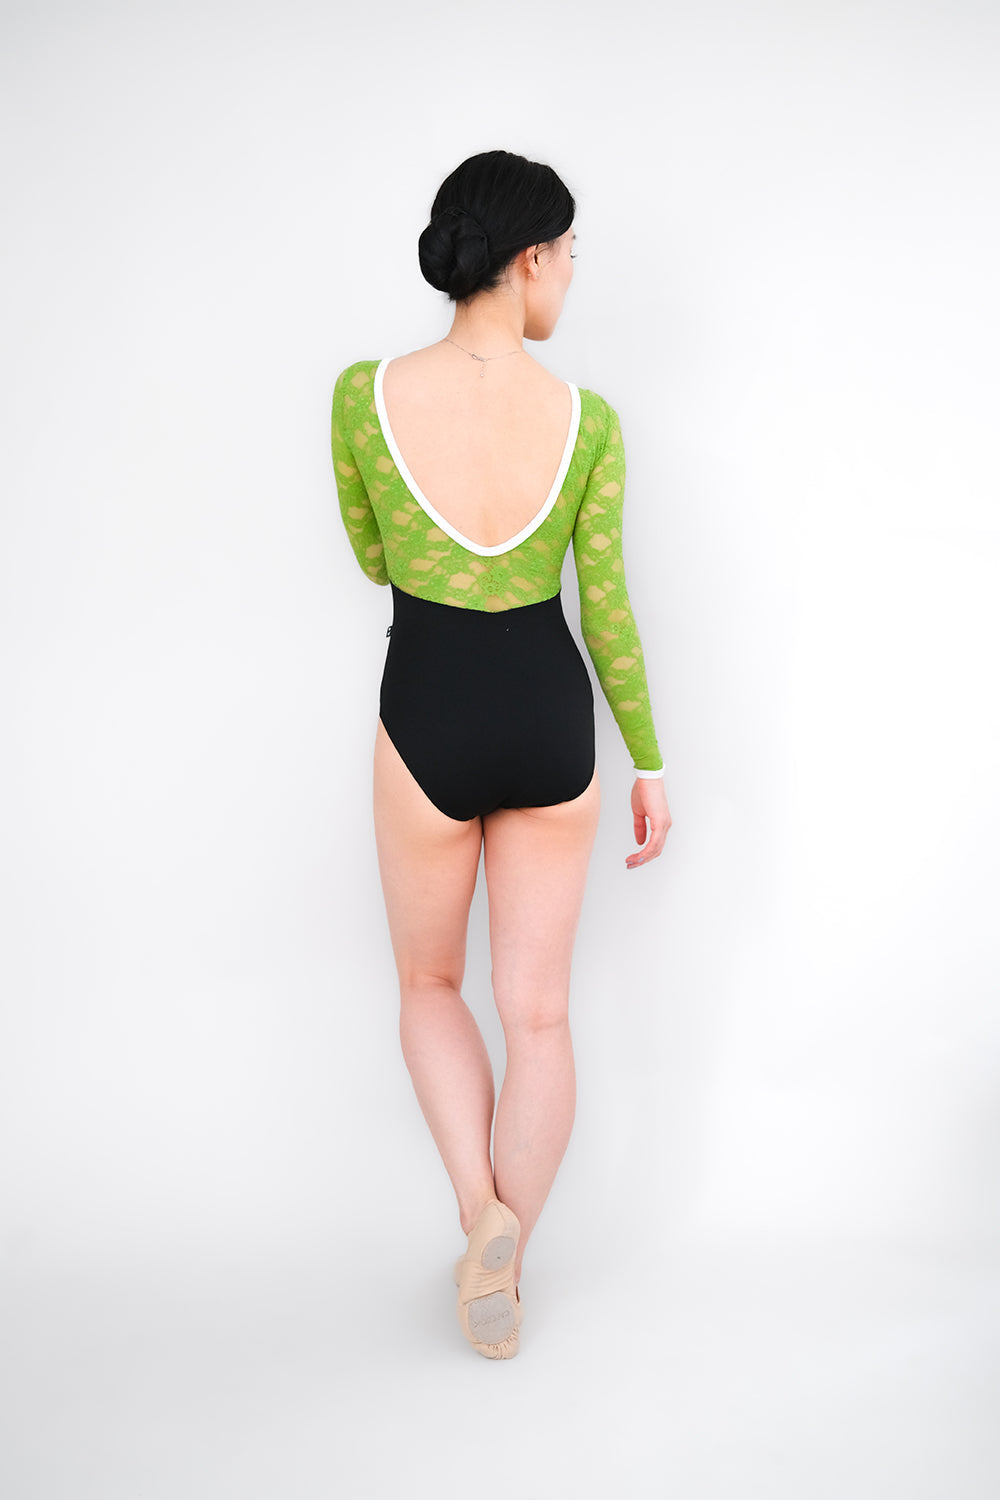 [PS] Audrey Duo Sleeve Ballet Leotard - Black/Green Lace